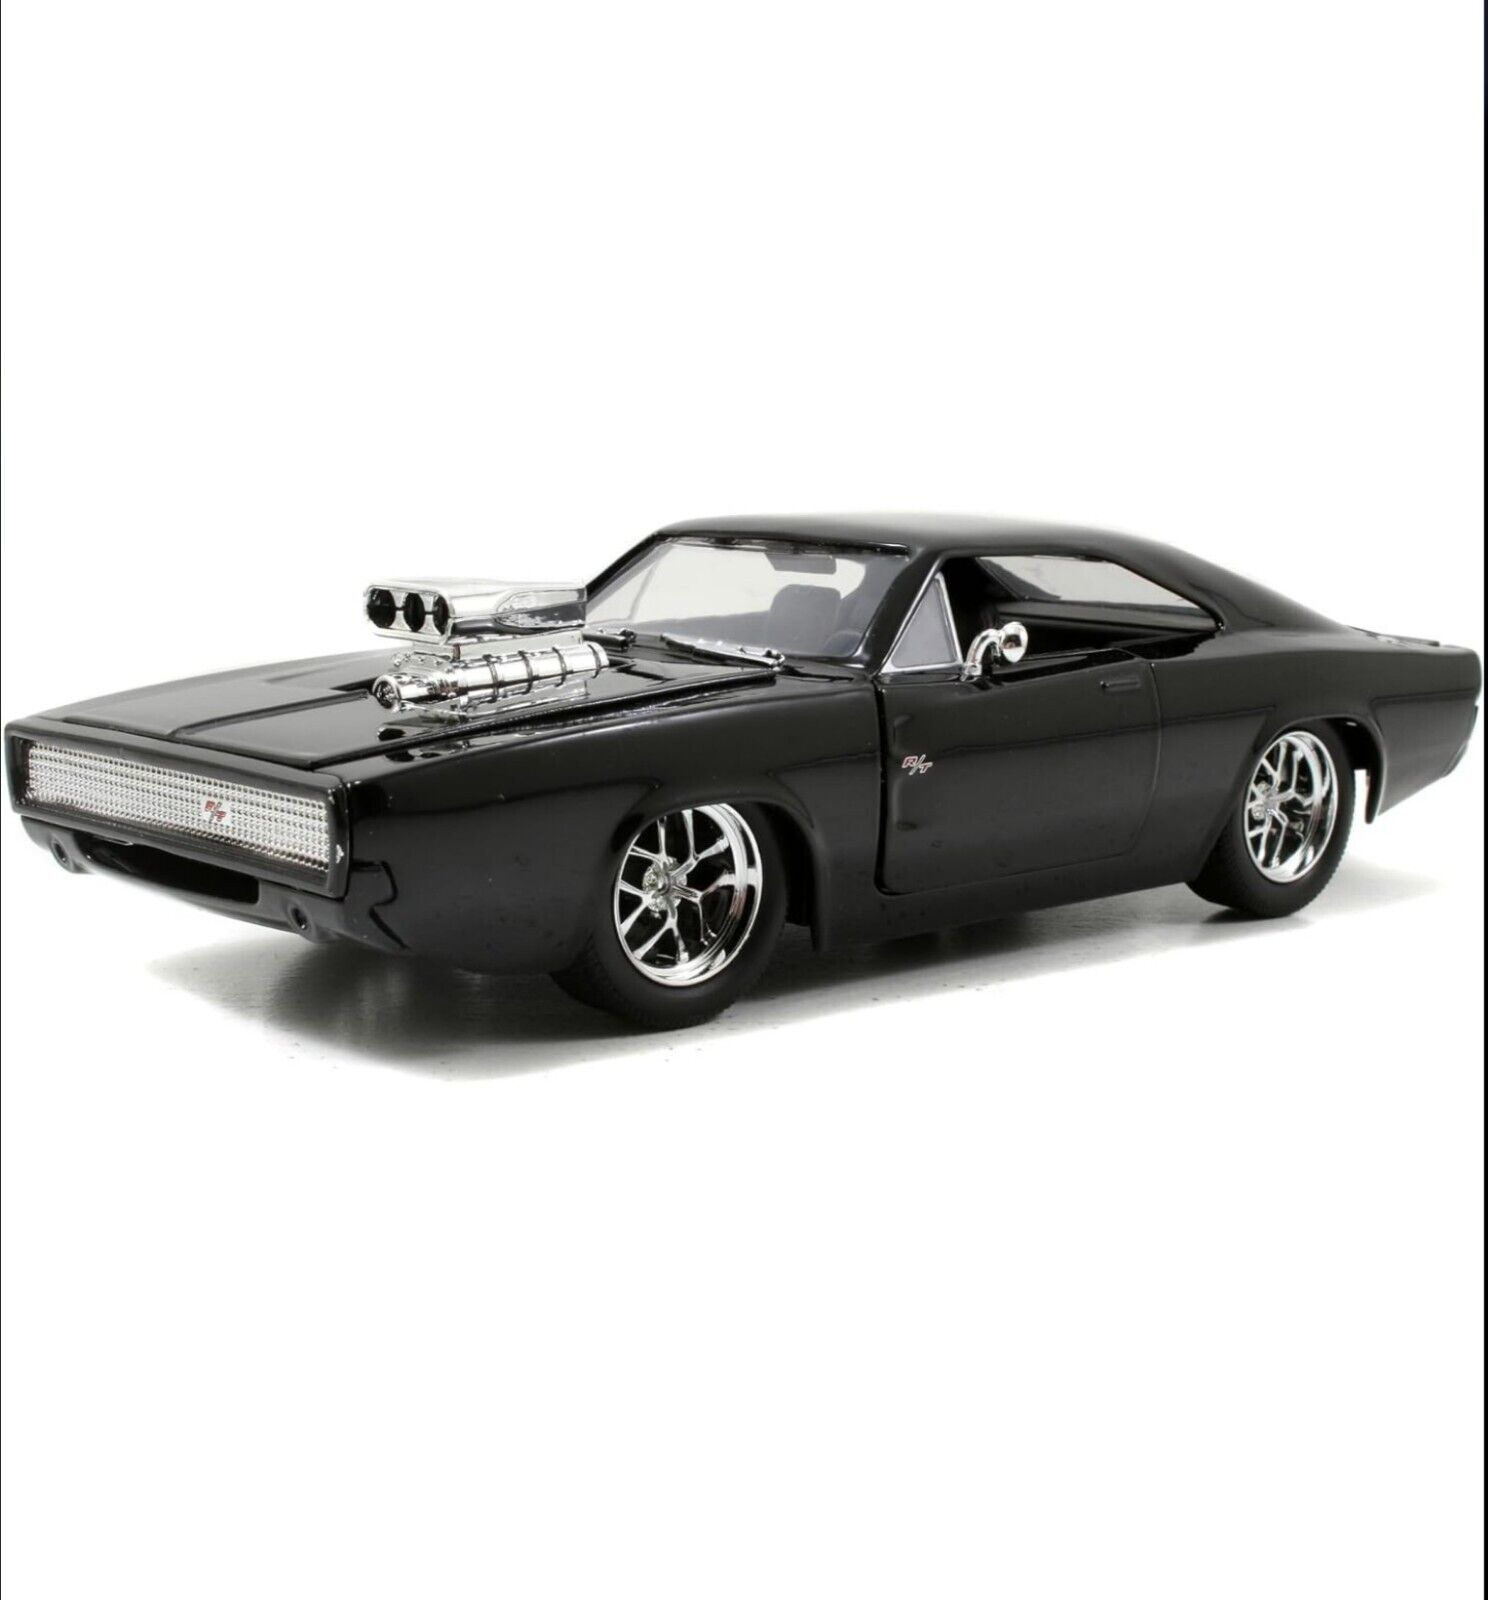 NEW JADA DIECAST FAST AND FURIOUS 7 DOM'S DODGE CHARGER R/T BLACK 1:24 SCALE